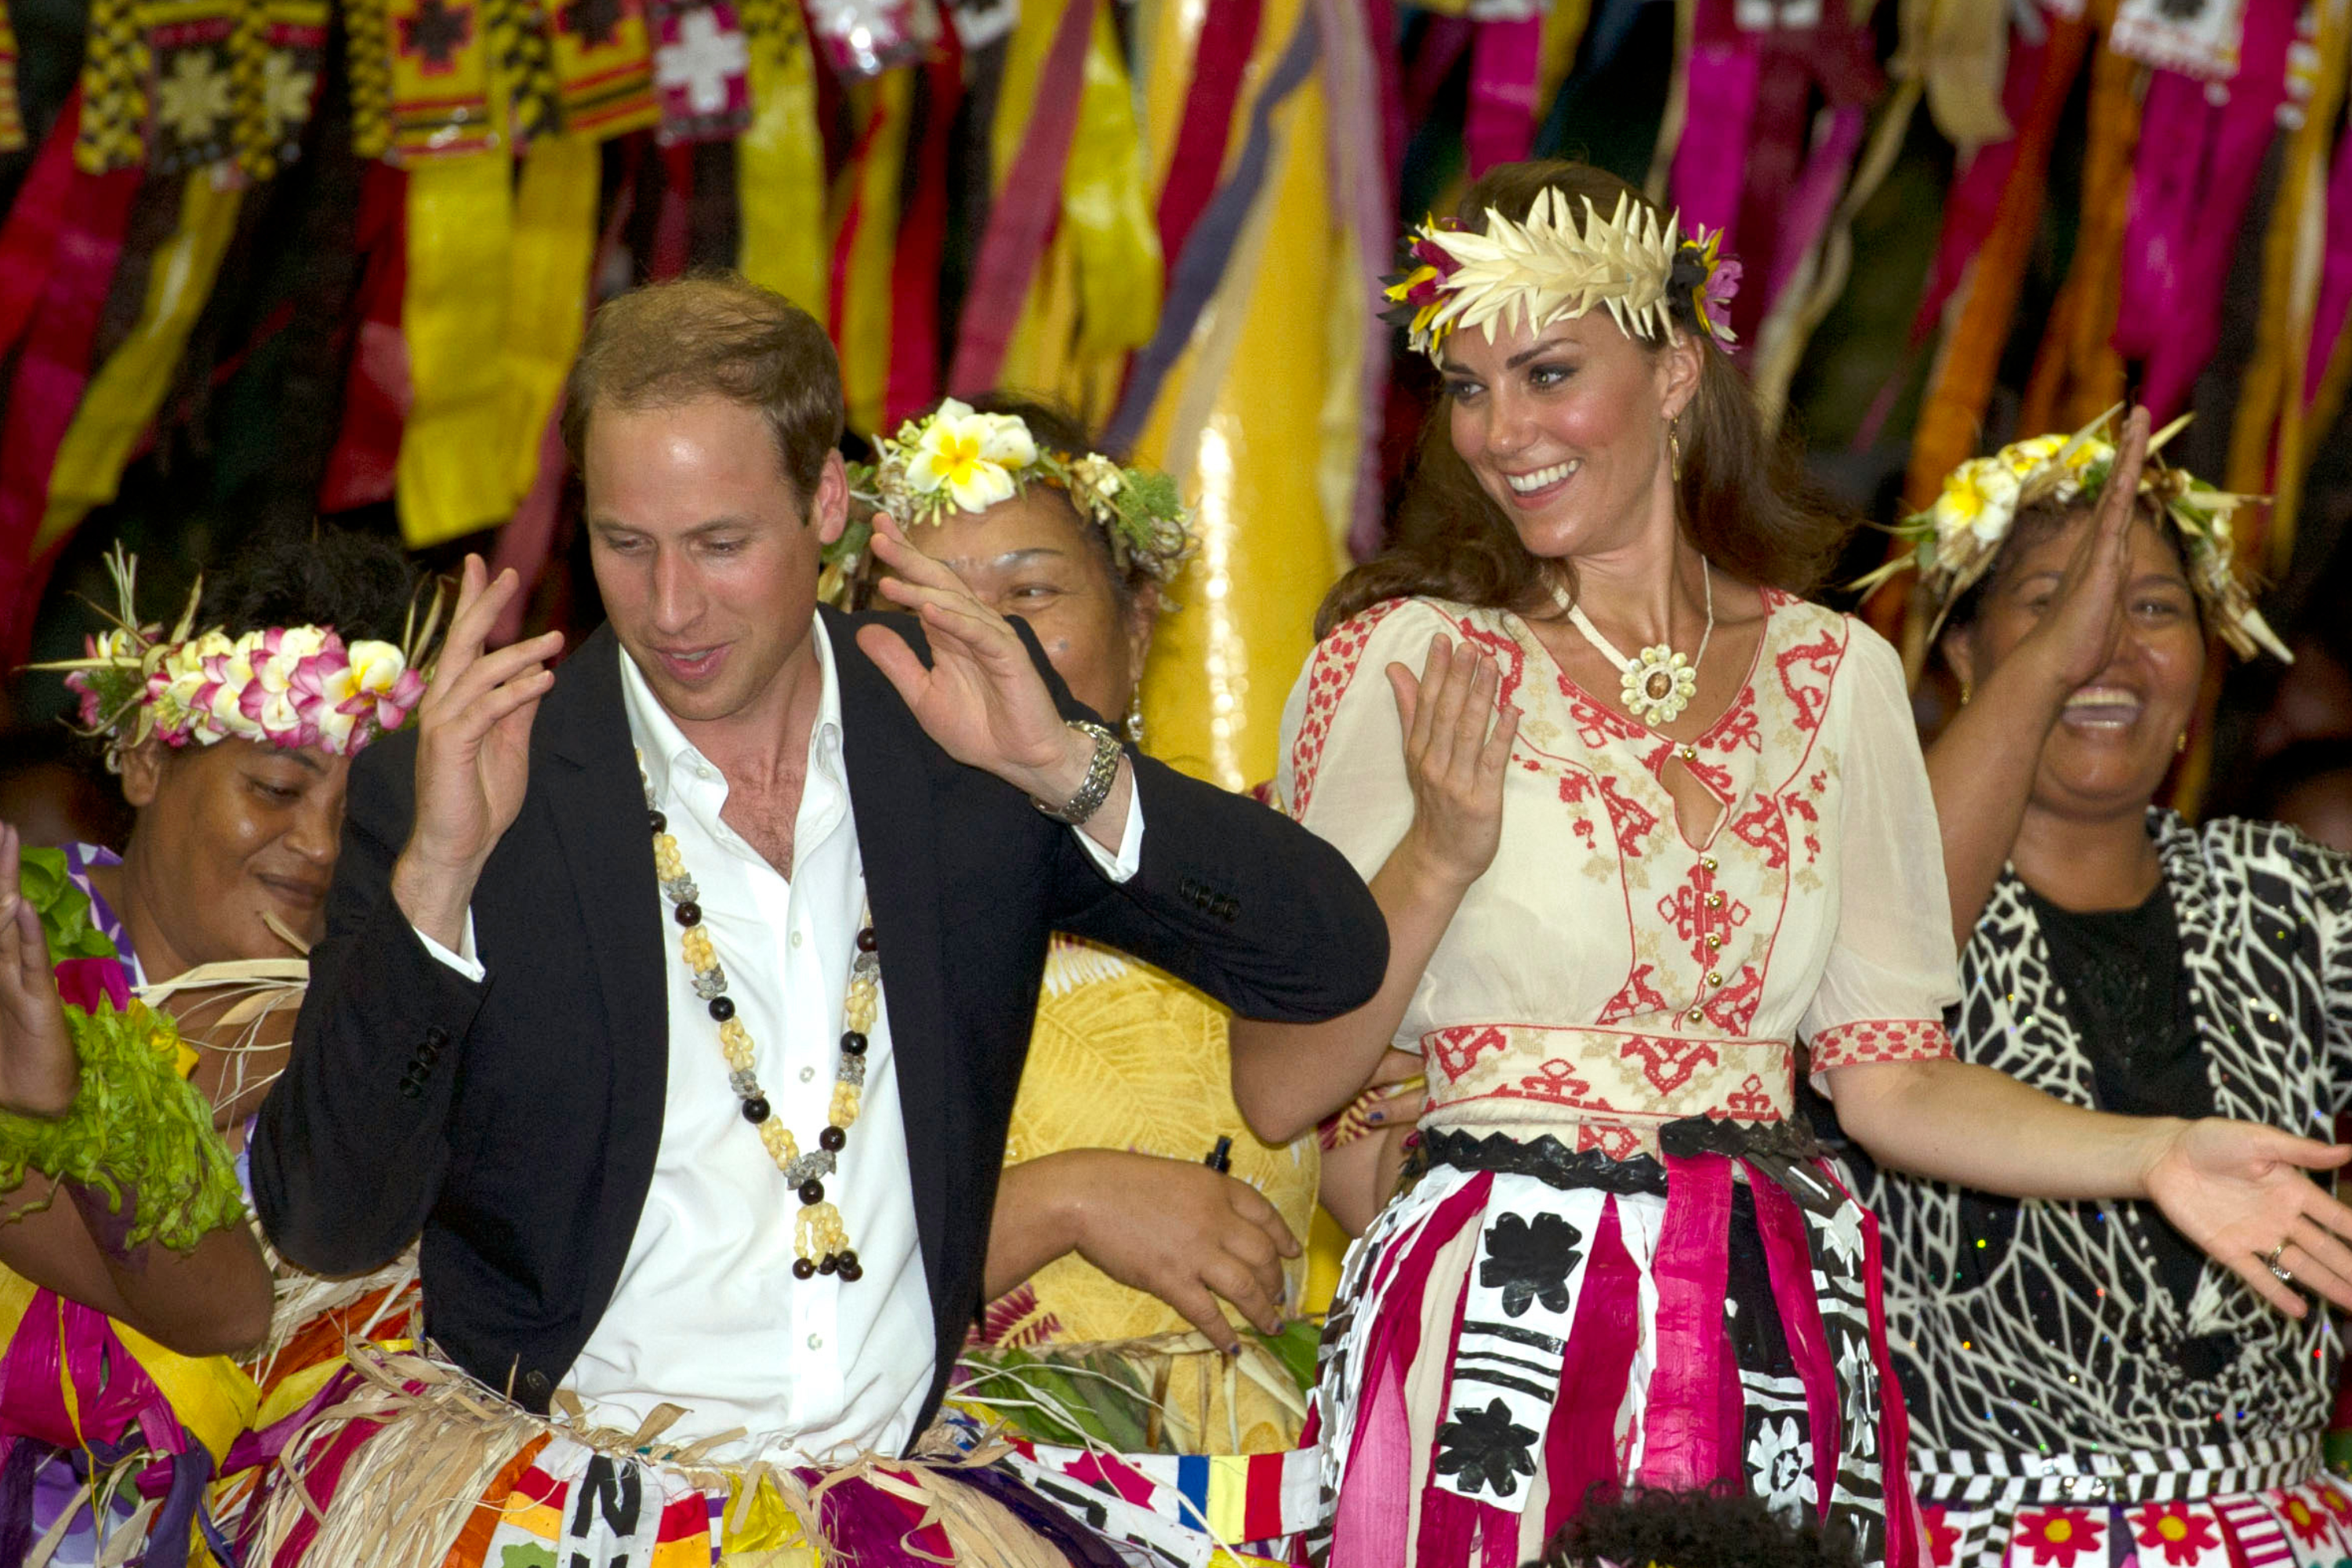 Prince William's 'Insane' Dancing Goes Viral